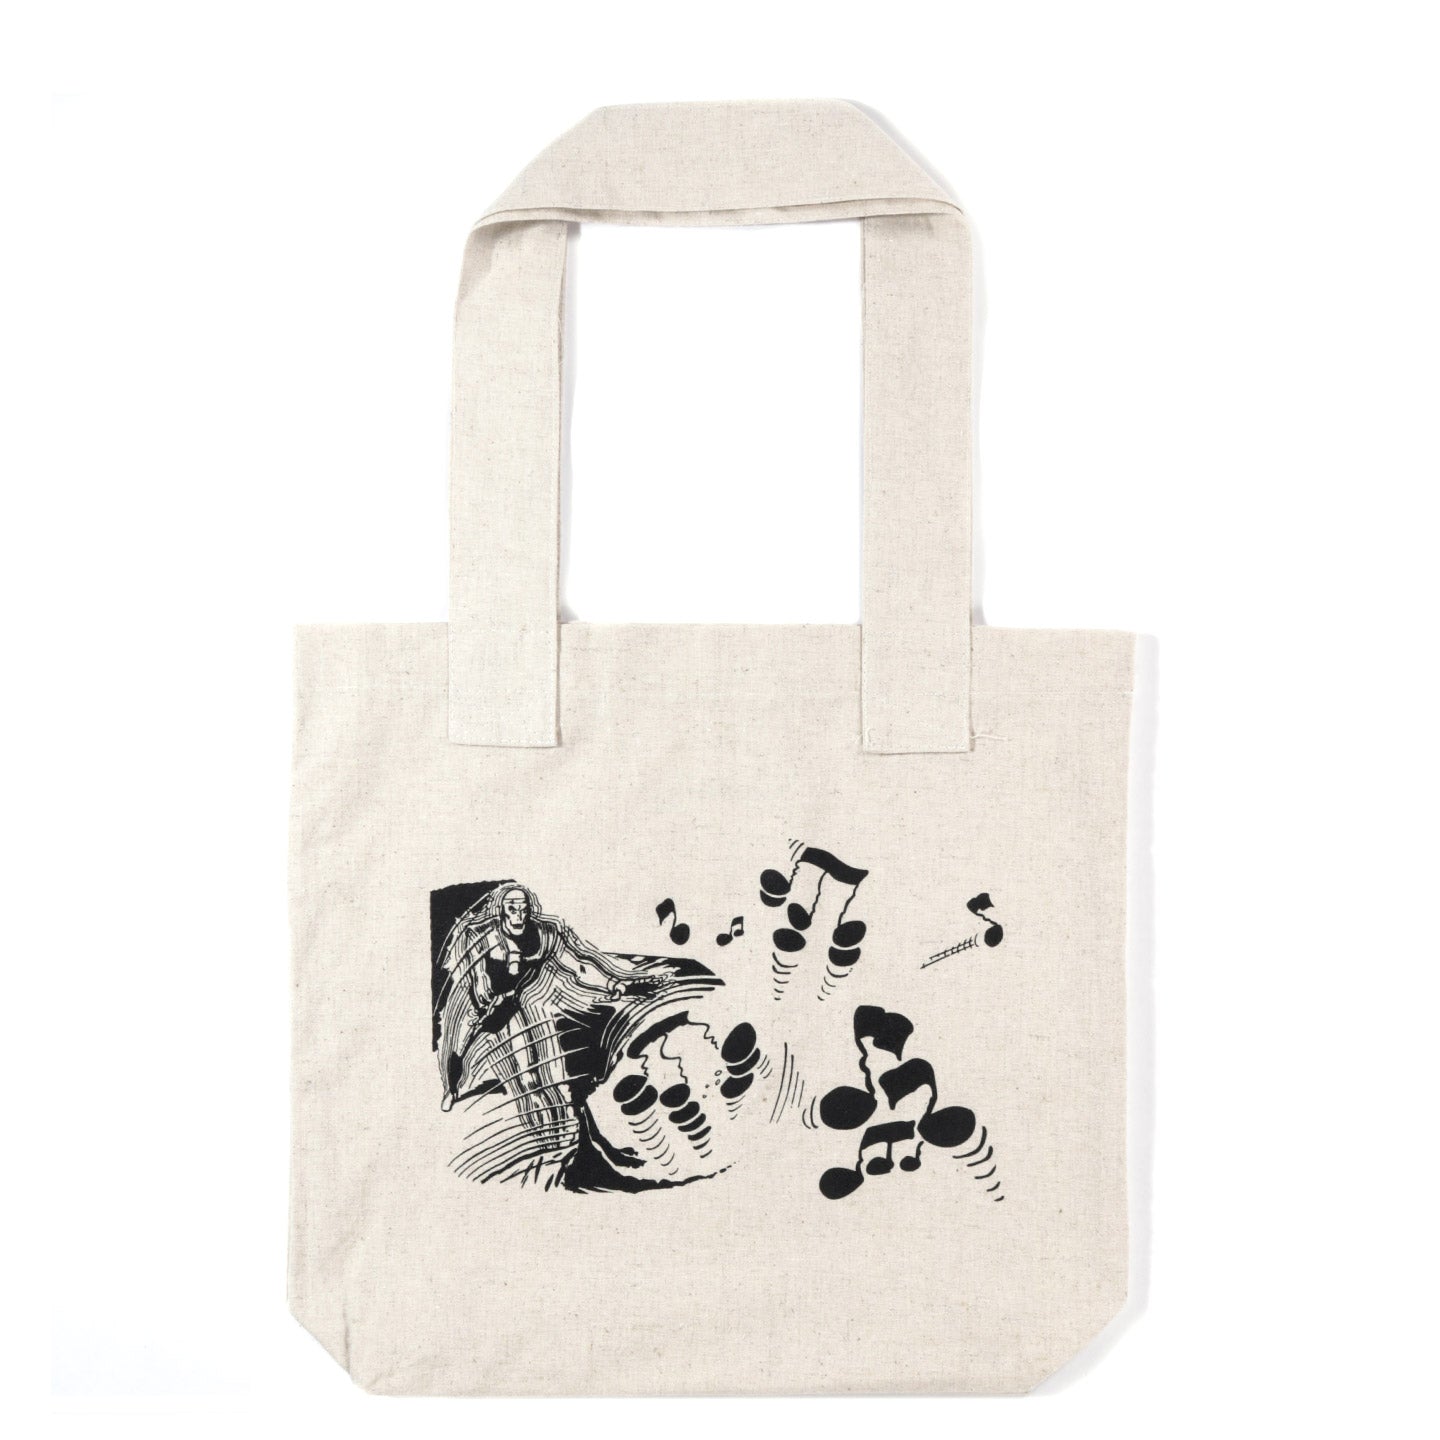 BOOK WORKS CAPTAIN JAZZ TOTE